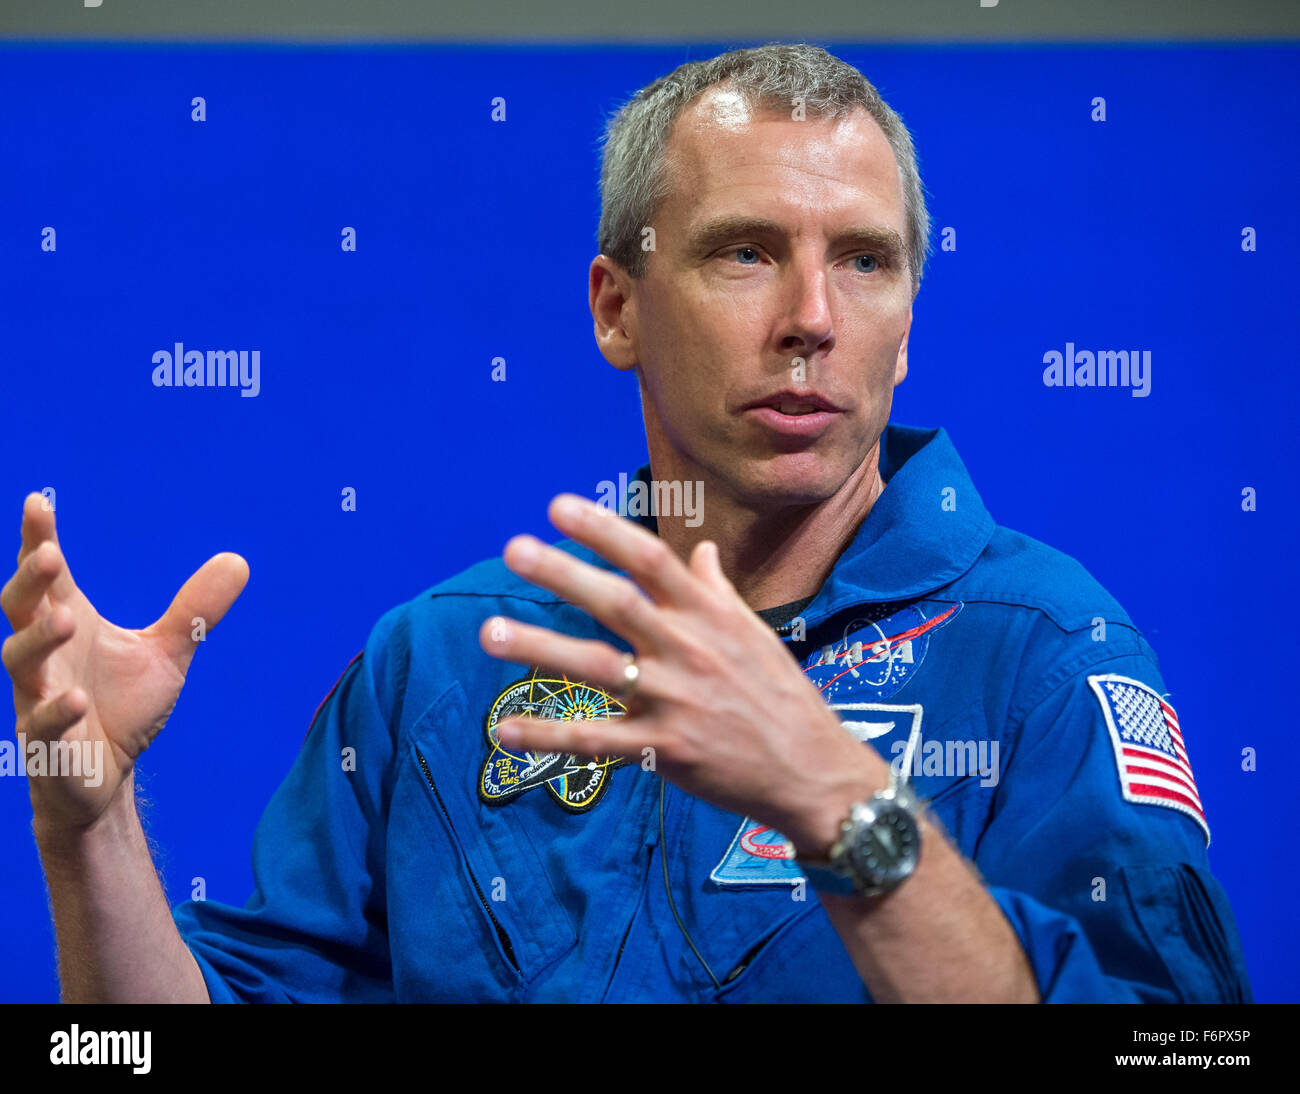 NASA Astronaut Drew Feustel participates in a Jet Propulsion Laboratory (JPL) employee panel discussion about NASA’s journey to Mars and the film 'The Martian,' Tuesday, Aug. 18, 2015, at JPL in Pasadena, California. NASA scientists and engineers served as technical consultants on the film. The movie portrays a realistic view of the climate and topography of Mars, based on NASA data, and some of the challenges NASA faces as we prepare for human exploration of the Red Planet in the 2030s. Photo Credit: (NASA/Bill Ingalls) Stock Photo